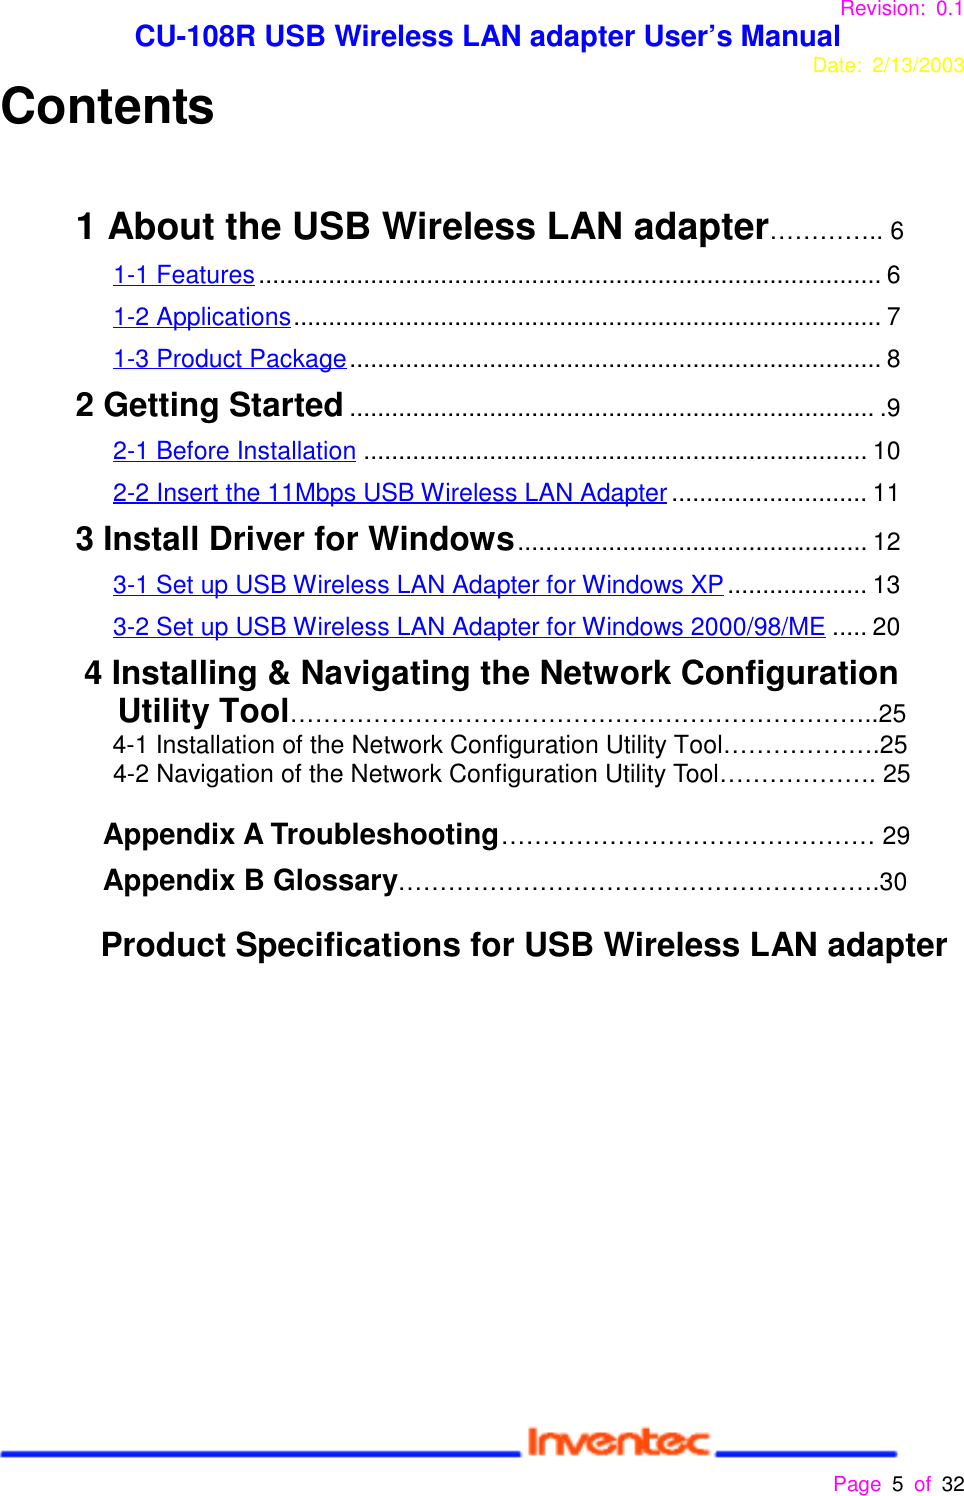 Revision: 0.1 CU-108R USB Wireless LAN adapter User’s ManualDate: 2/13/2003 Page 5 of 32 Contents1 About the USB Wireless LAN adapter………….. 61-1 Features......................................................................................... 61-2 Applications.................................................................................... 71-3 Product Package............................................................................ 82 Getting Started........................................................................... .9         2-1 Before Installation ........................................................................ 102-2 Insert the 11Mbps USB Wireless LAN Adapter............................ 113 Install Driver for Windows.................................................. 123-1 Set up USB Wireless LAN Adapter for Windows XP.................... 133-2 Set up USB Wireless LAN Adapter for Windows 2000/98/ME ..... 204 Installing &amp; Navigating the Network ConfigurationUtility Tool……………………………………………………………..254-1 Installation of the Network Configuration Utility Tool……………….254-2 Navigation of the Network Configuration Utility Tool………………. 25Appendix A Troubleshooting……………………………………… 29Appendix B Glossary………………………………………………….30        Product Specifications for USB Wireless LAN adapter